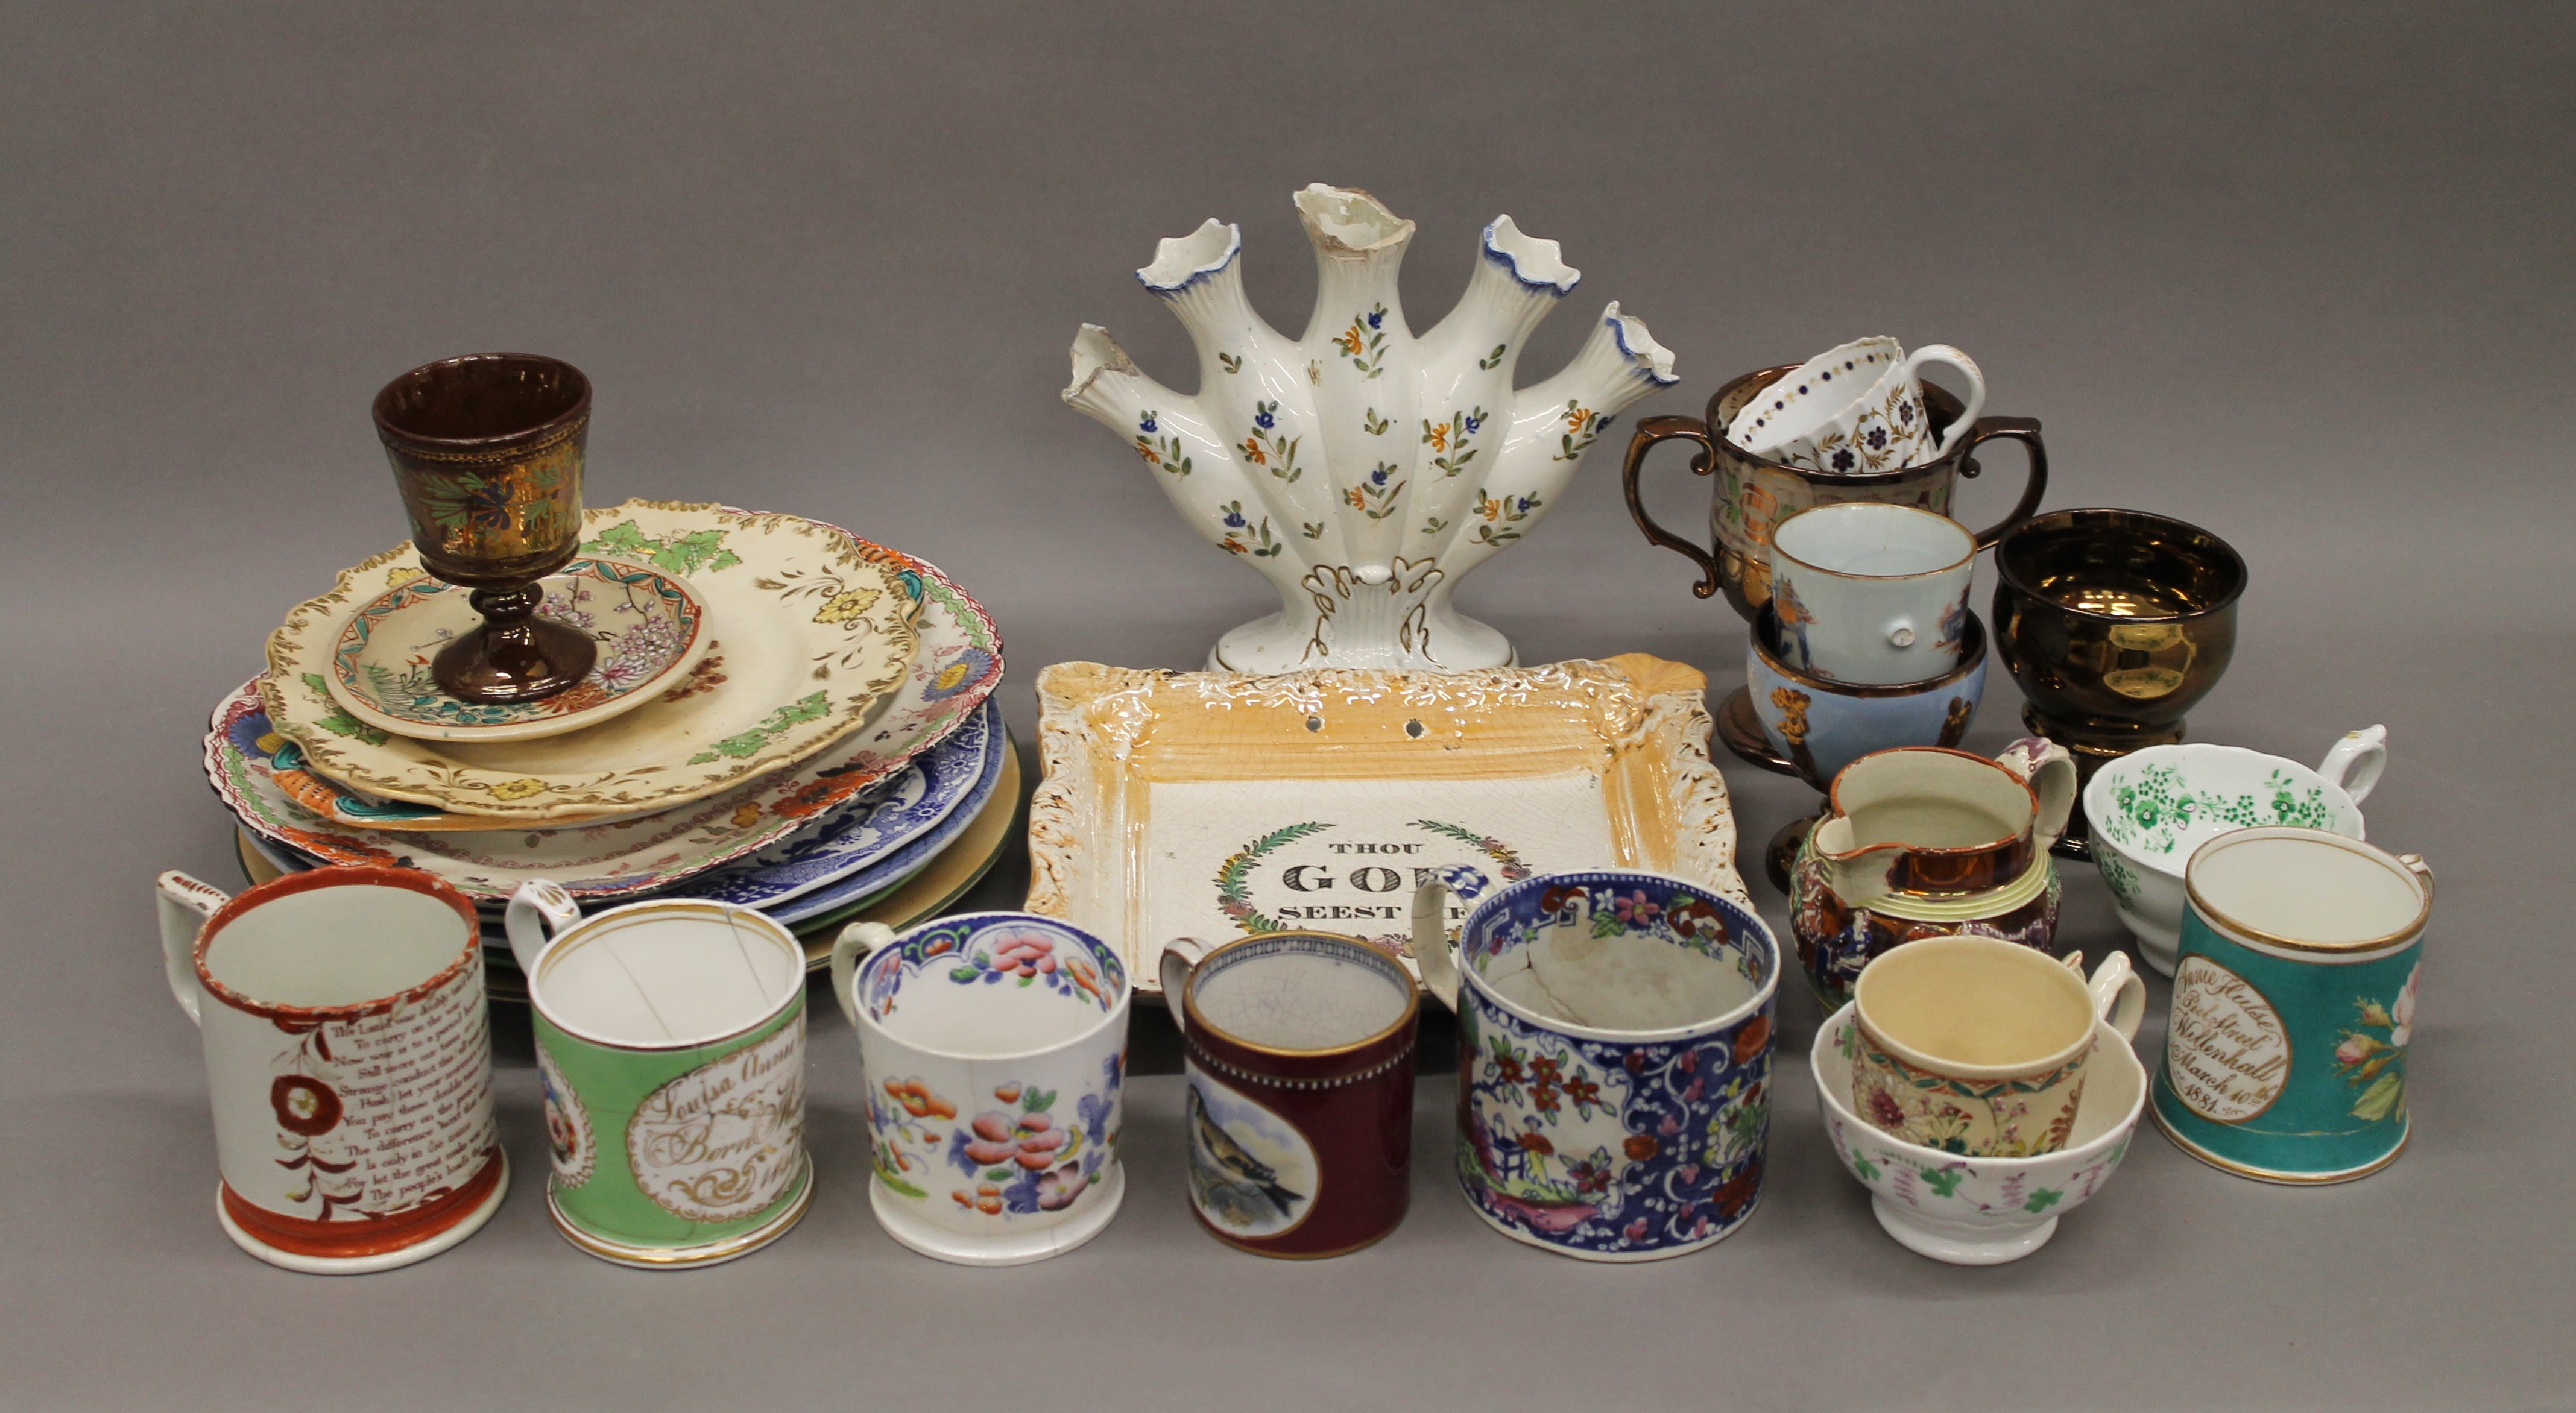 A quantity of 18th/19th century English porcelain.